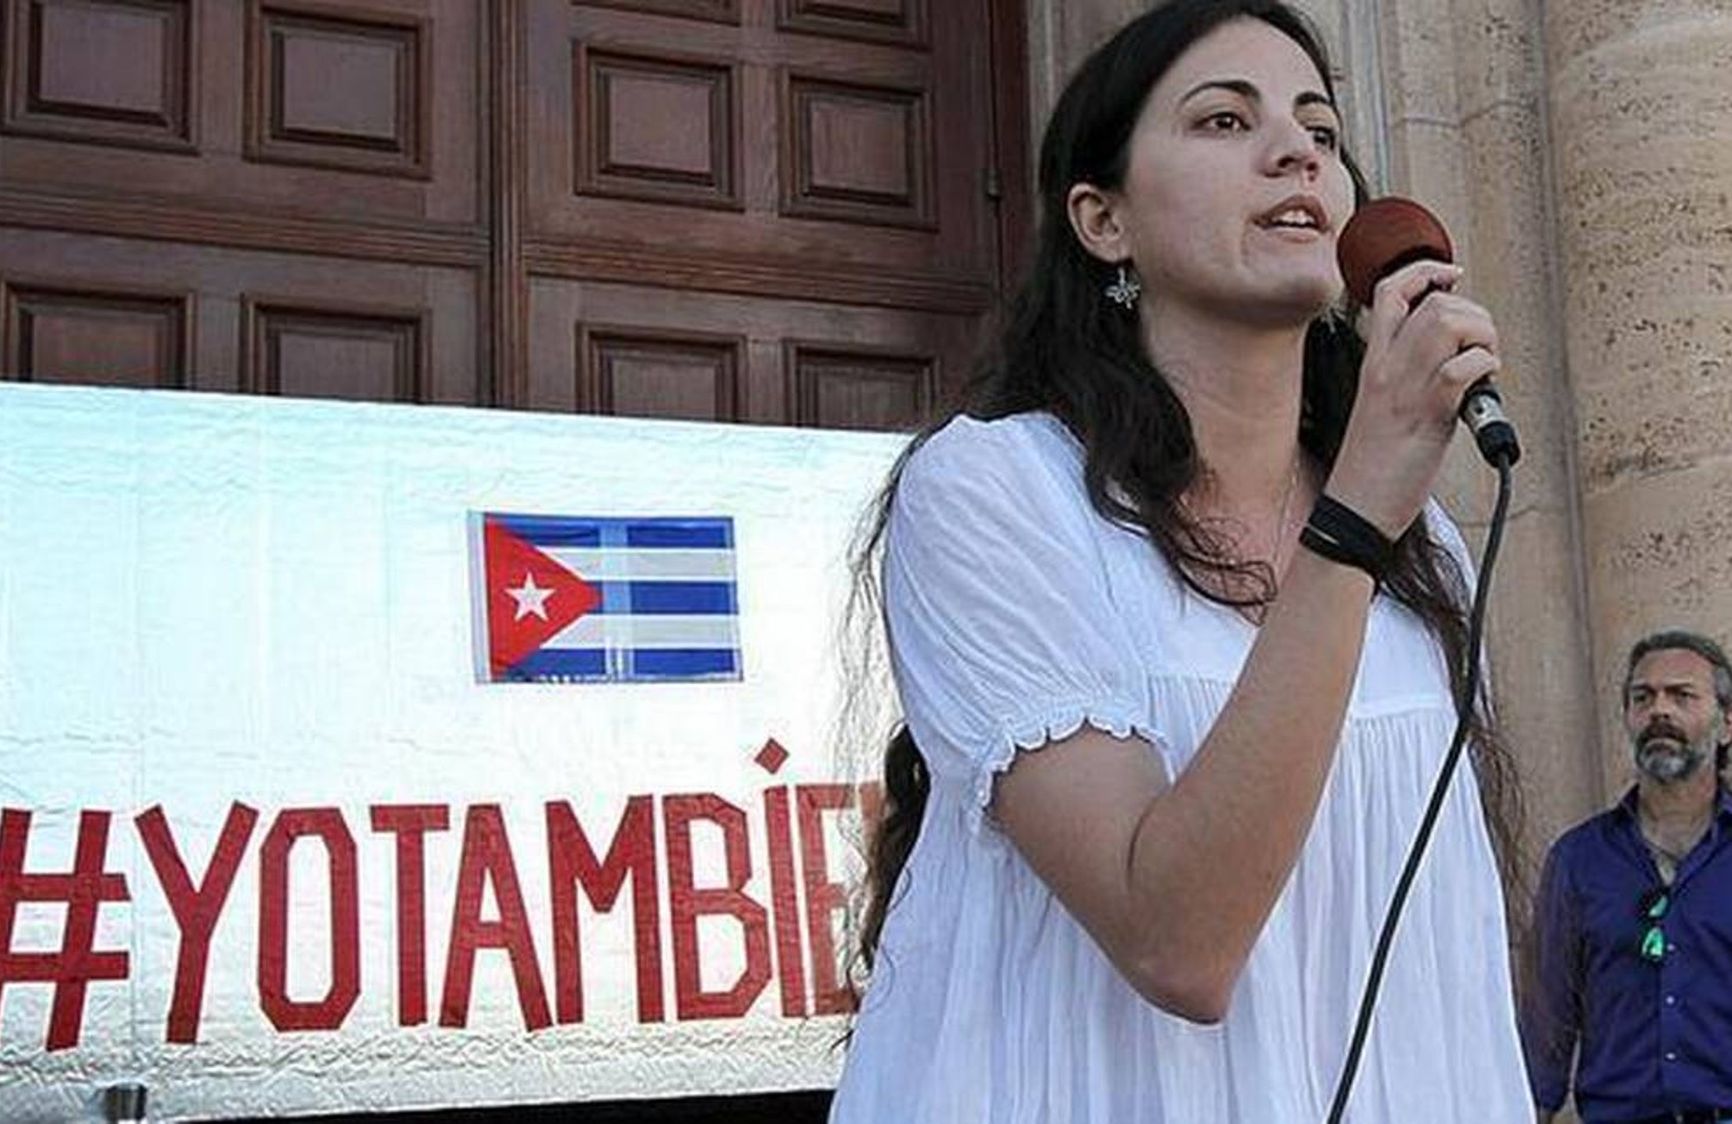 Rosa Maria Paya in exile continues the cause of her dissident father who died in 2012